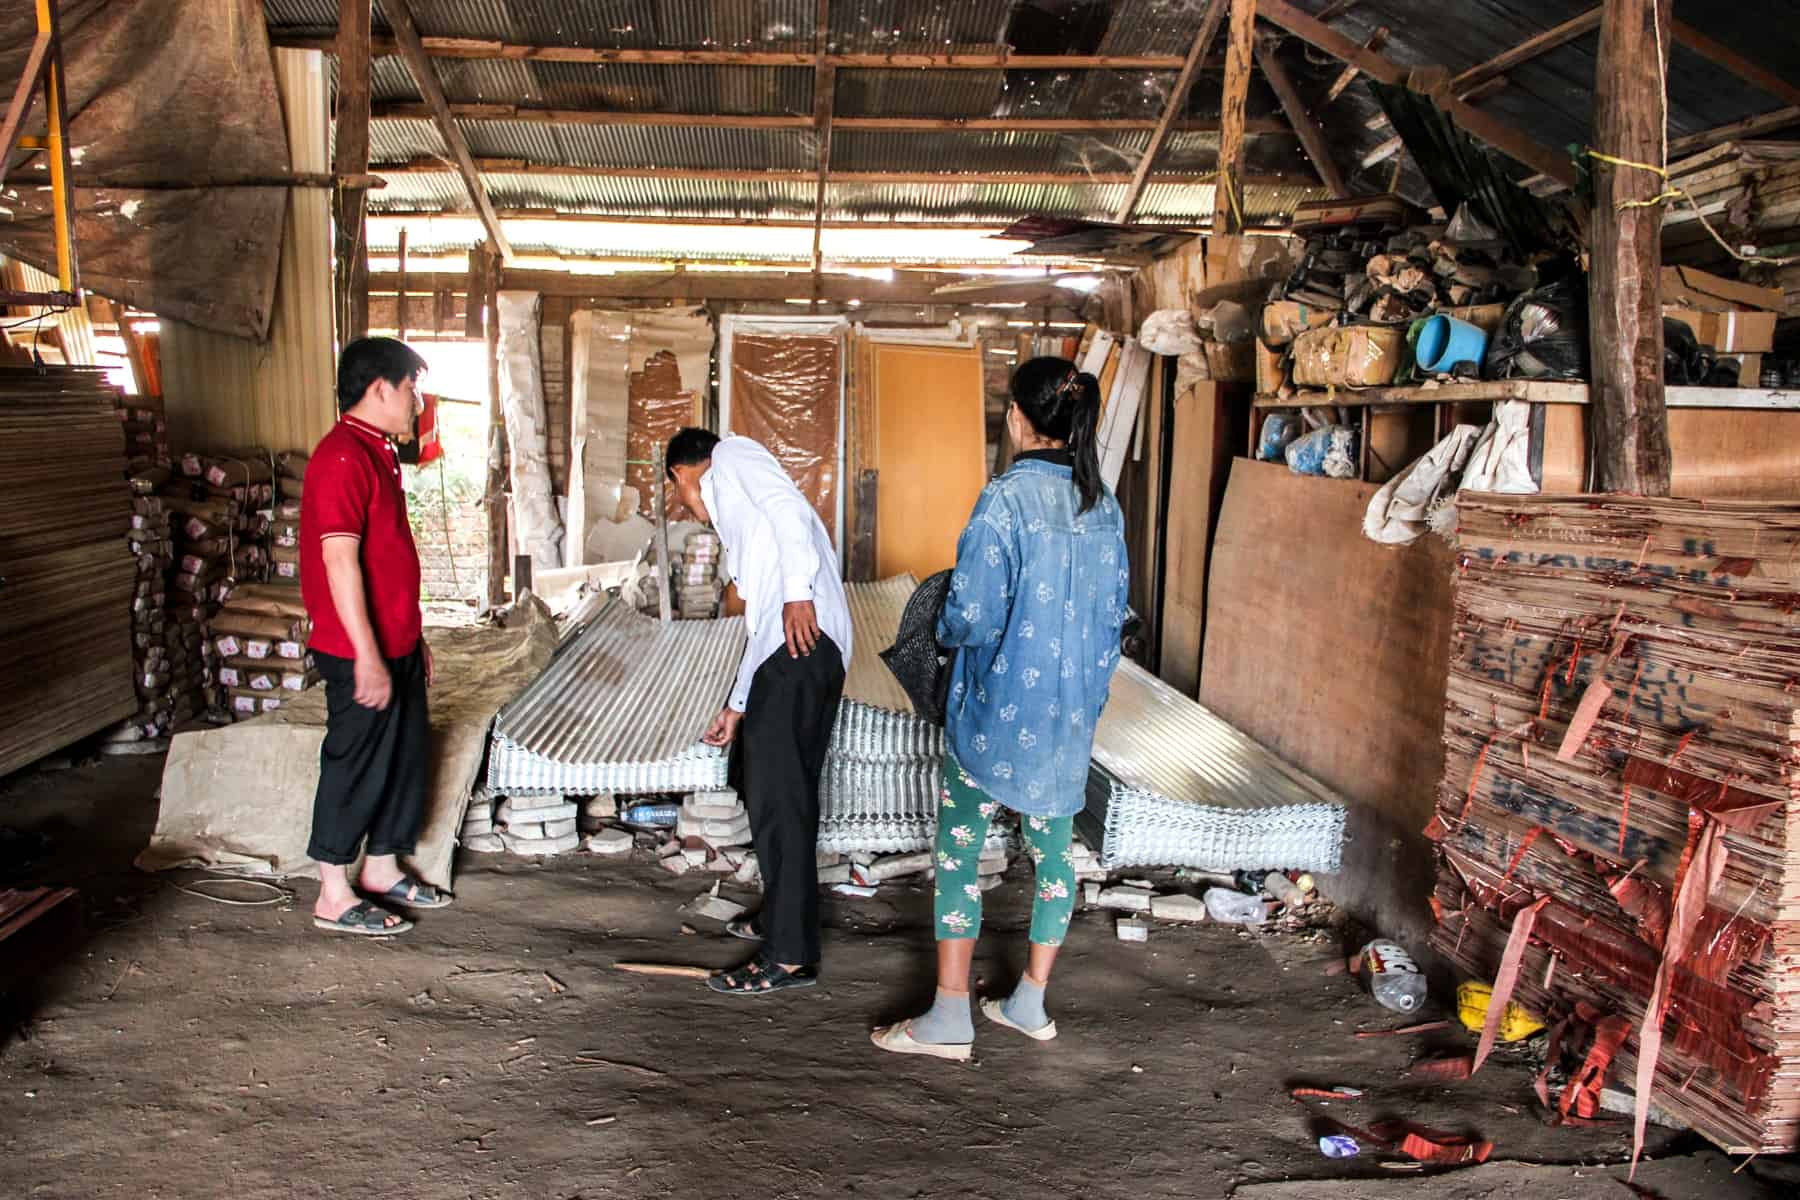 Three people inspect a pile of corrugated tin sheets inside a small wooden hut containing building materials.